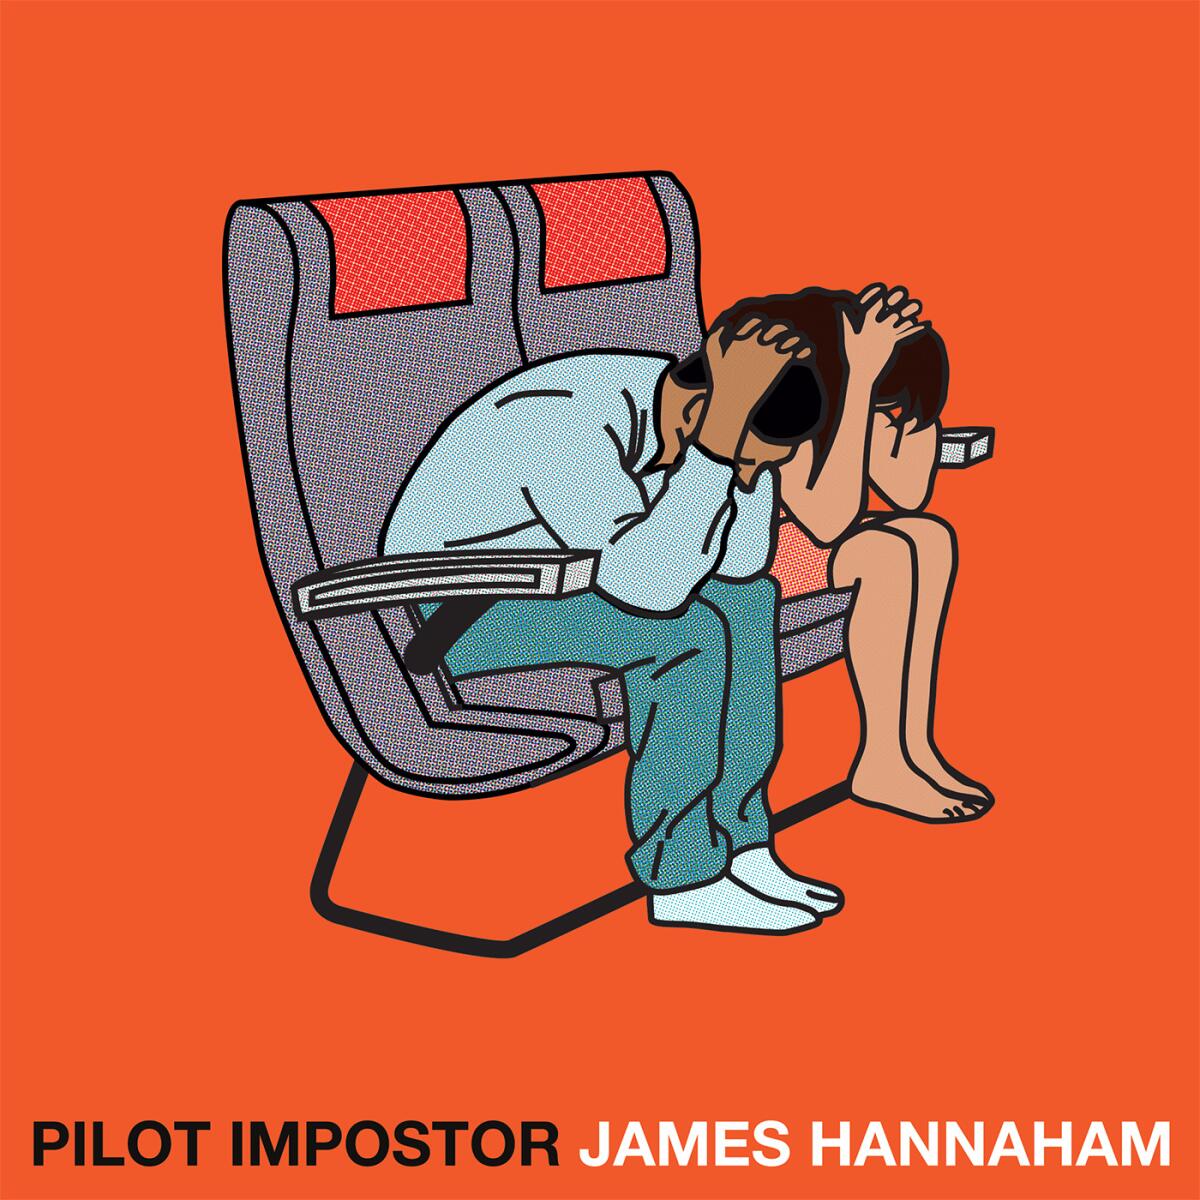 Book jacket for "Pilot Imposter" by James Hannaham.